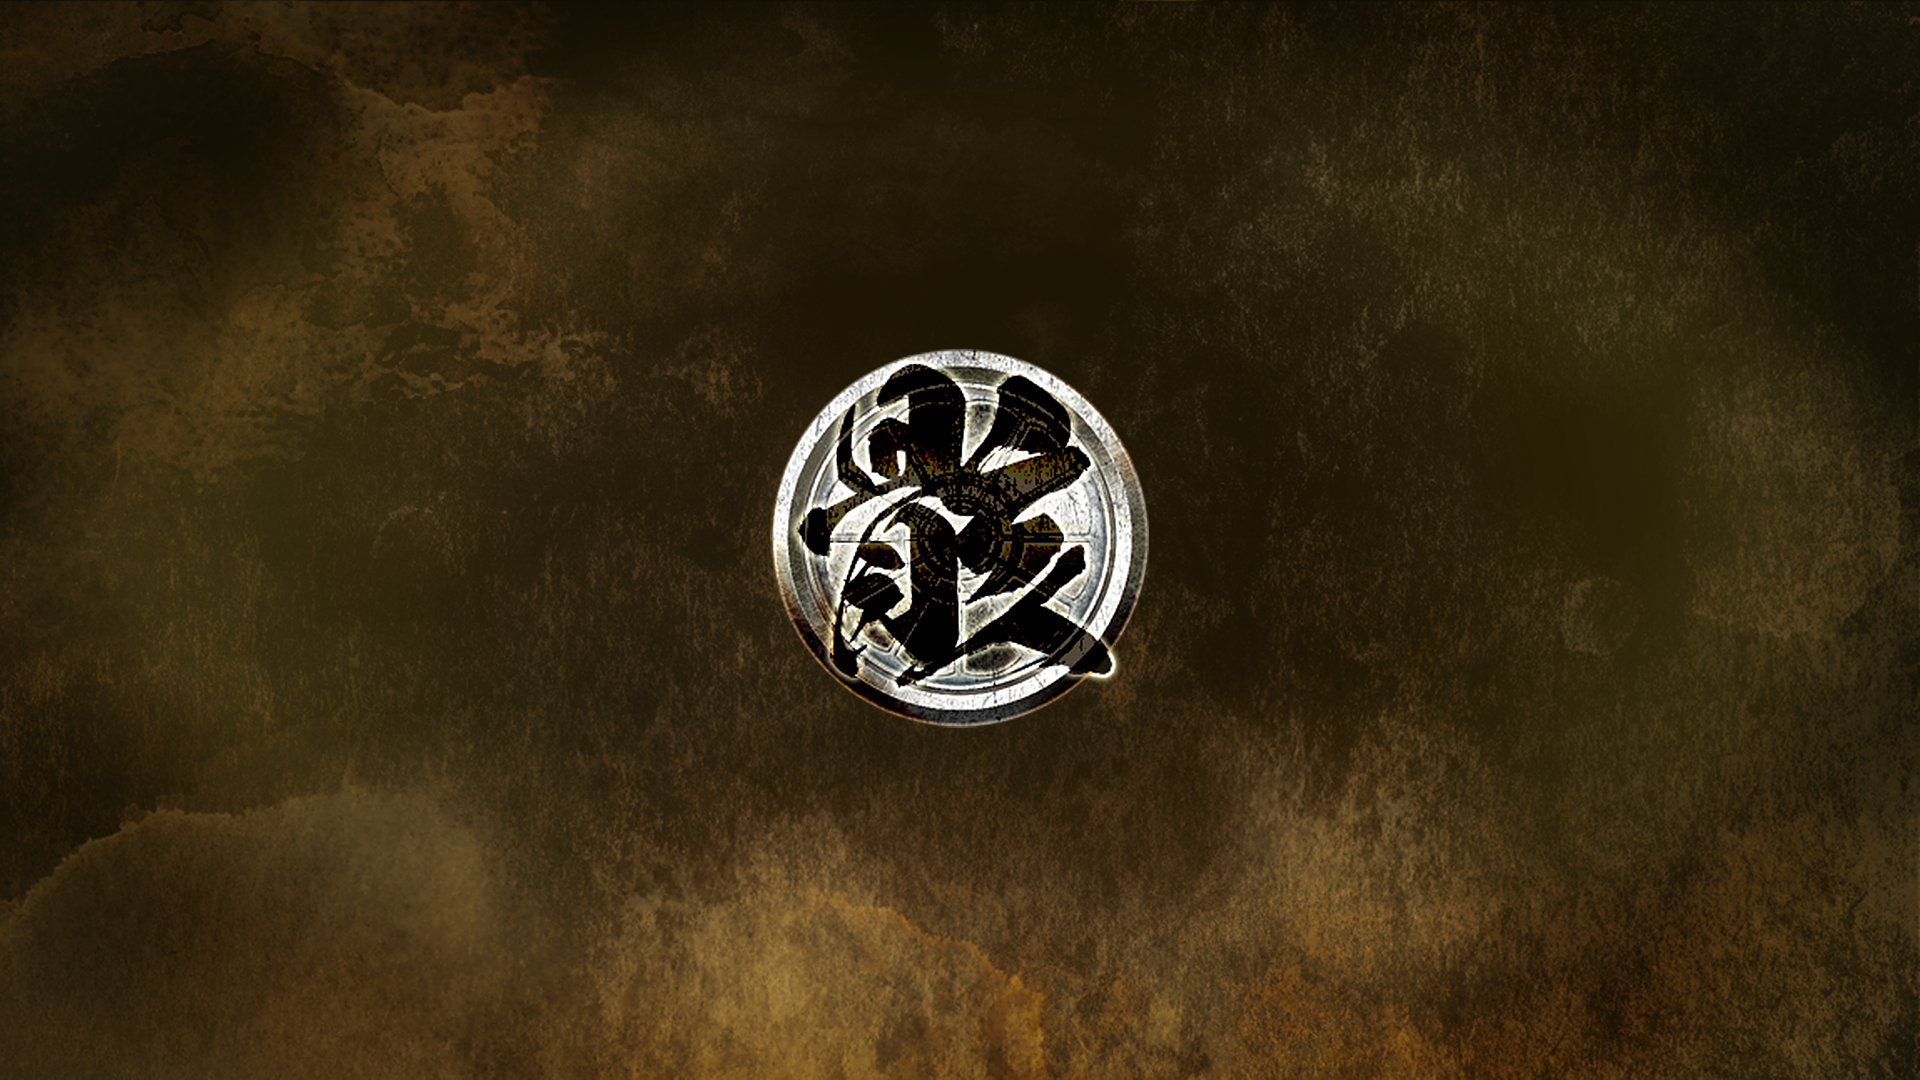 Icon for Crystal Skull